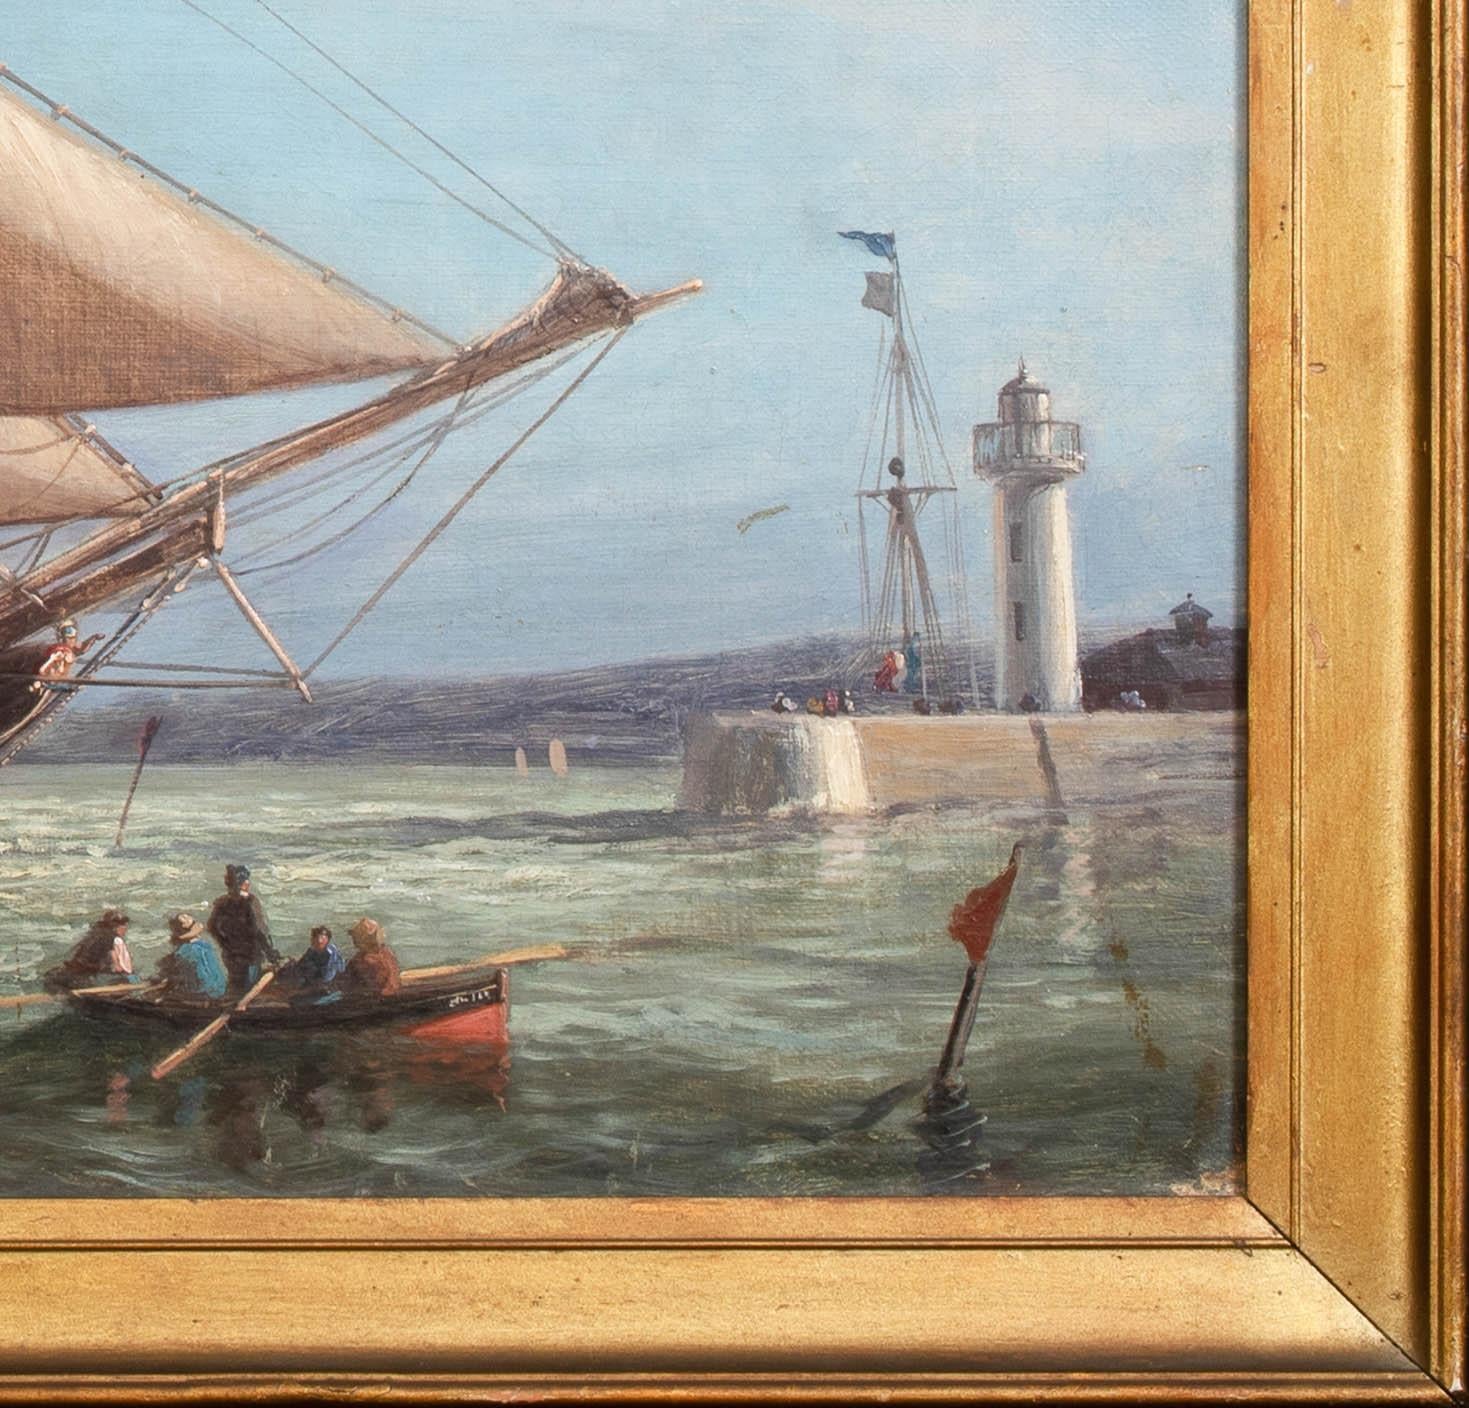 British Schooner Ship Entering Jersey / Guernsey Harbour Port, 19th Century - Gray Landscape Painting by Unknown